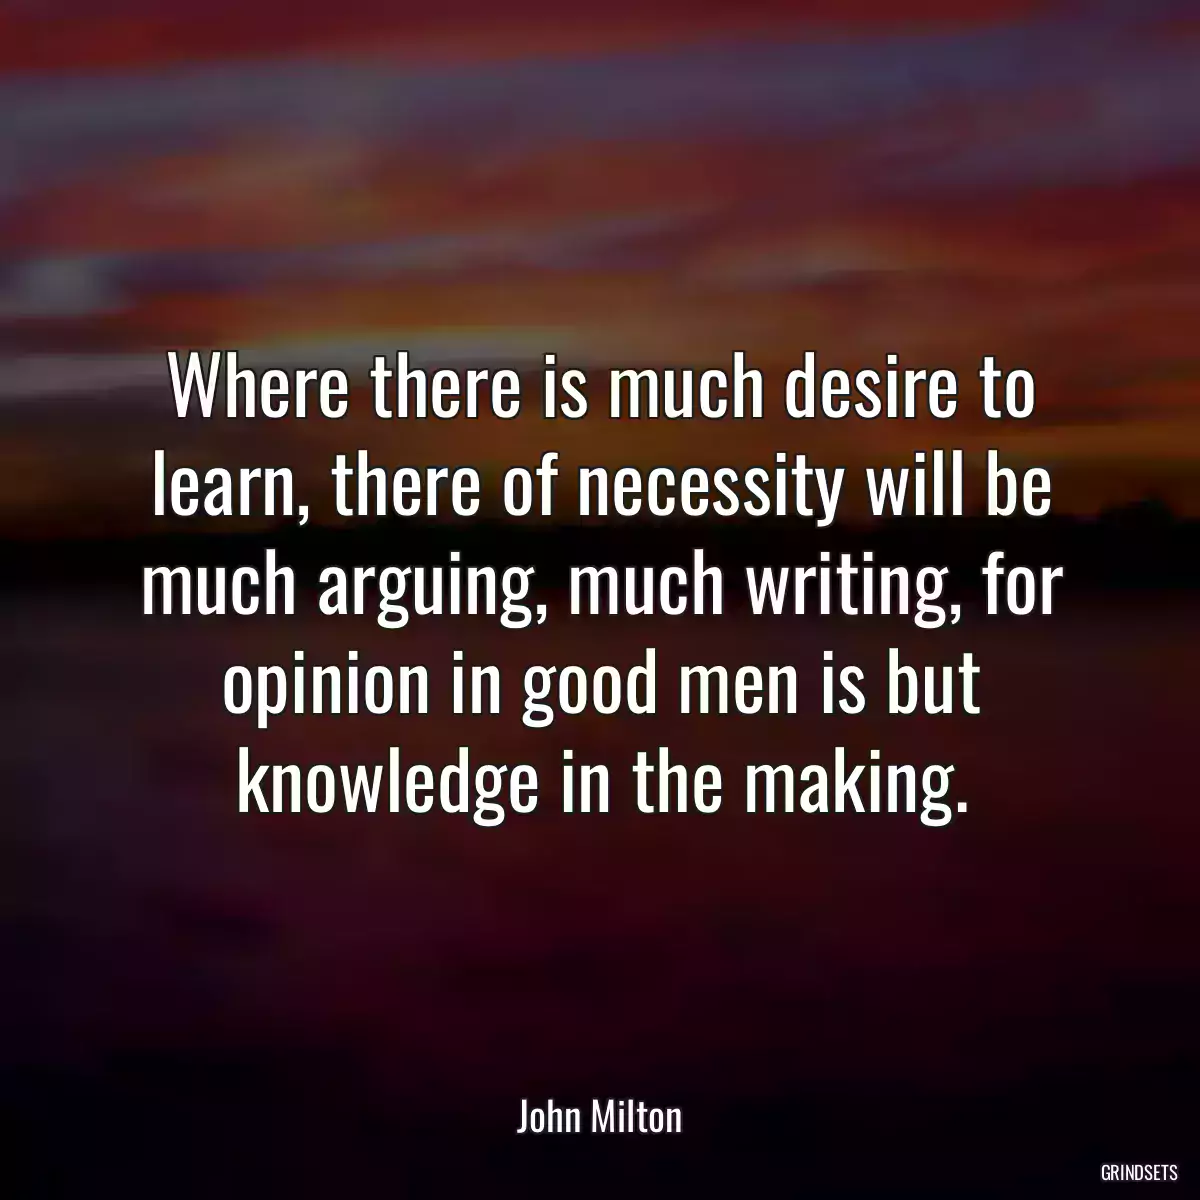 Where there is much desire to learn, there of necessity will be much arguing, much writing, for opinion in good men is but knowledge in the making.